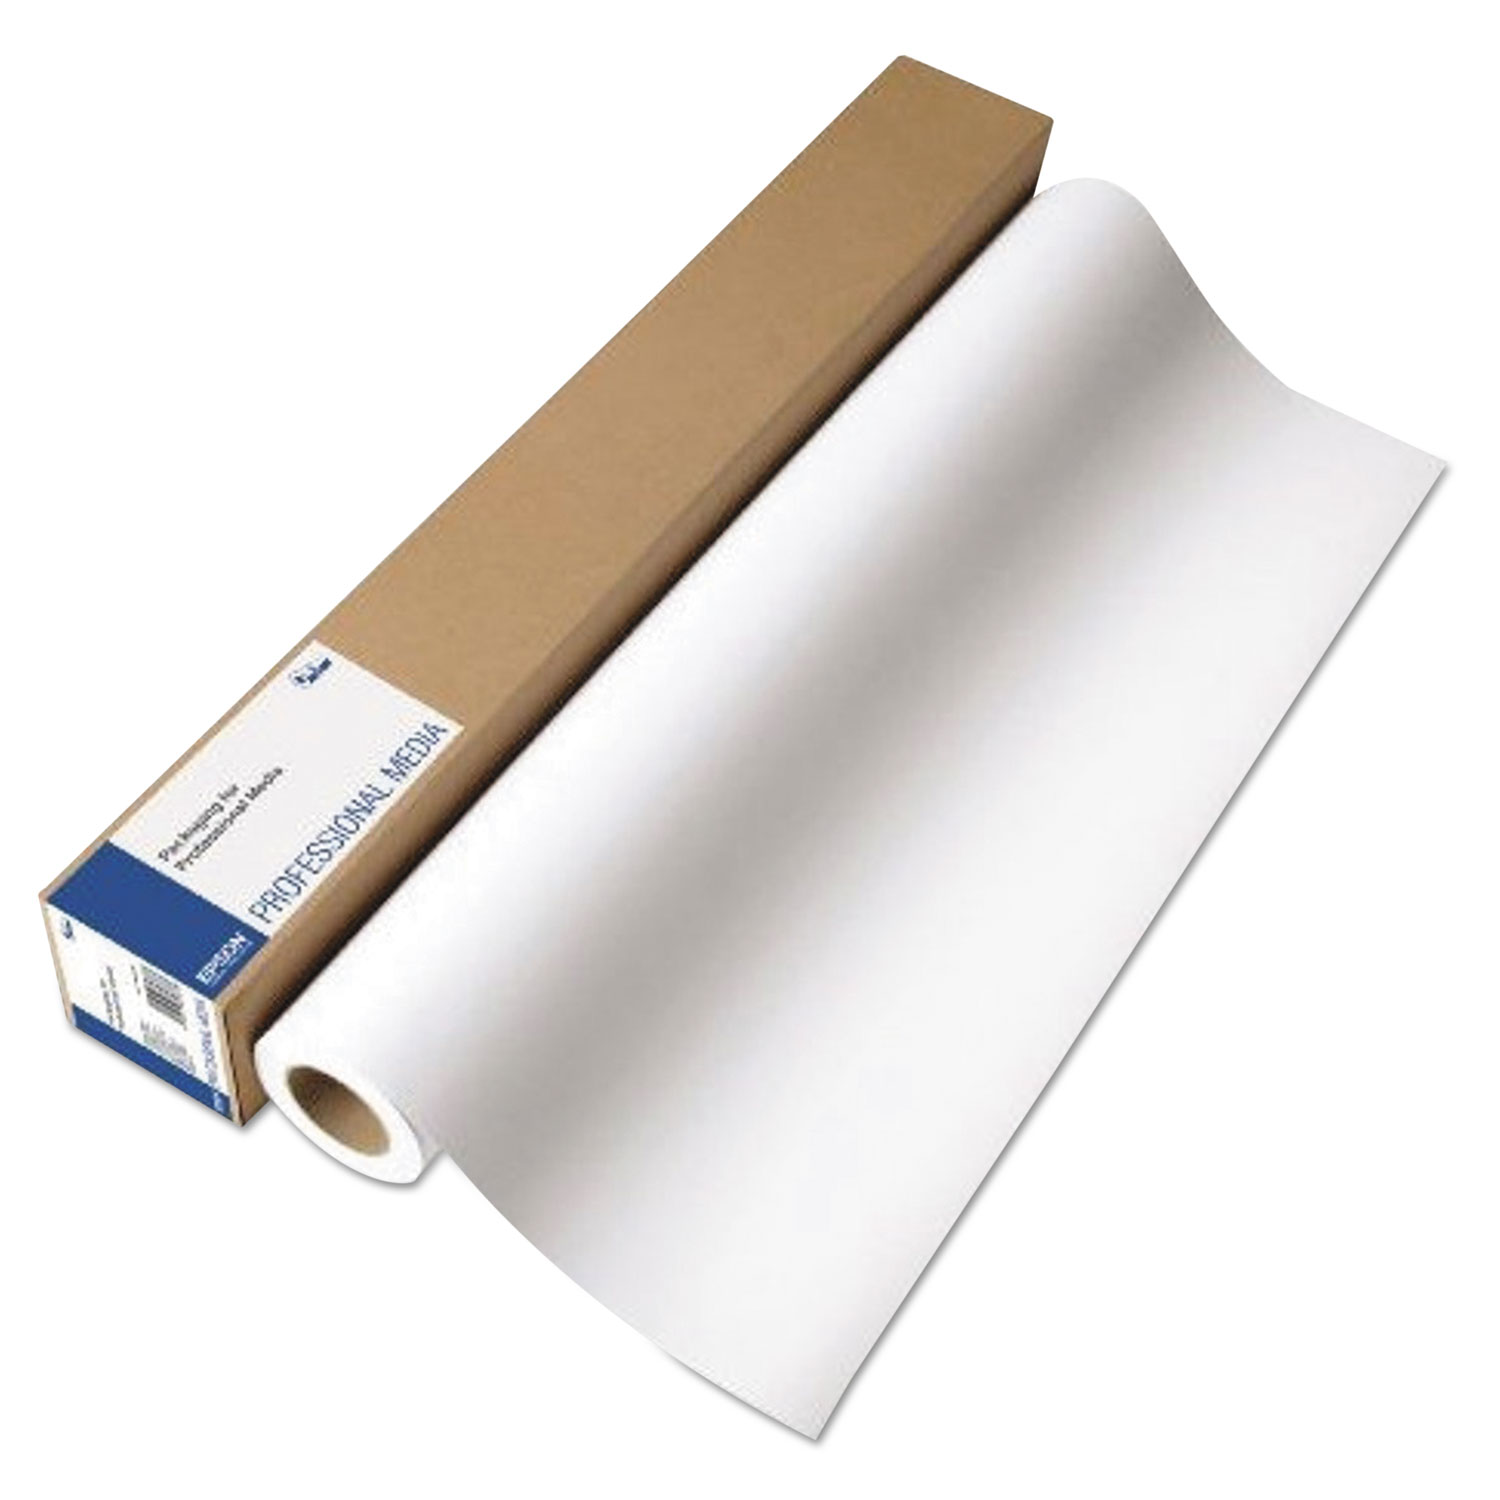  Epson S045002 GS Production Canvas Satin Paper Roll, 54 x 150 ft, Satin White (EPSS045002) 